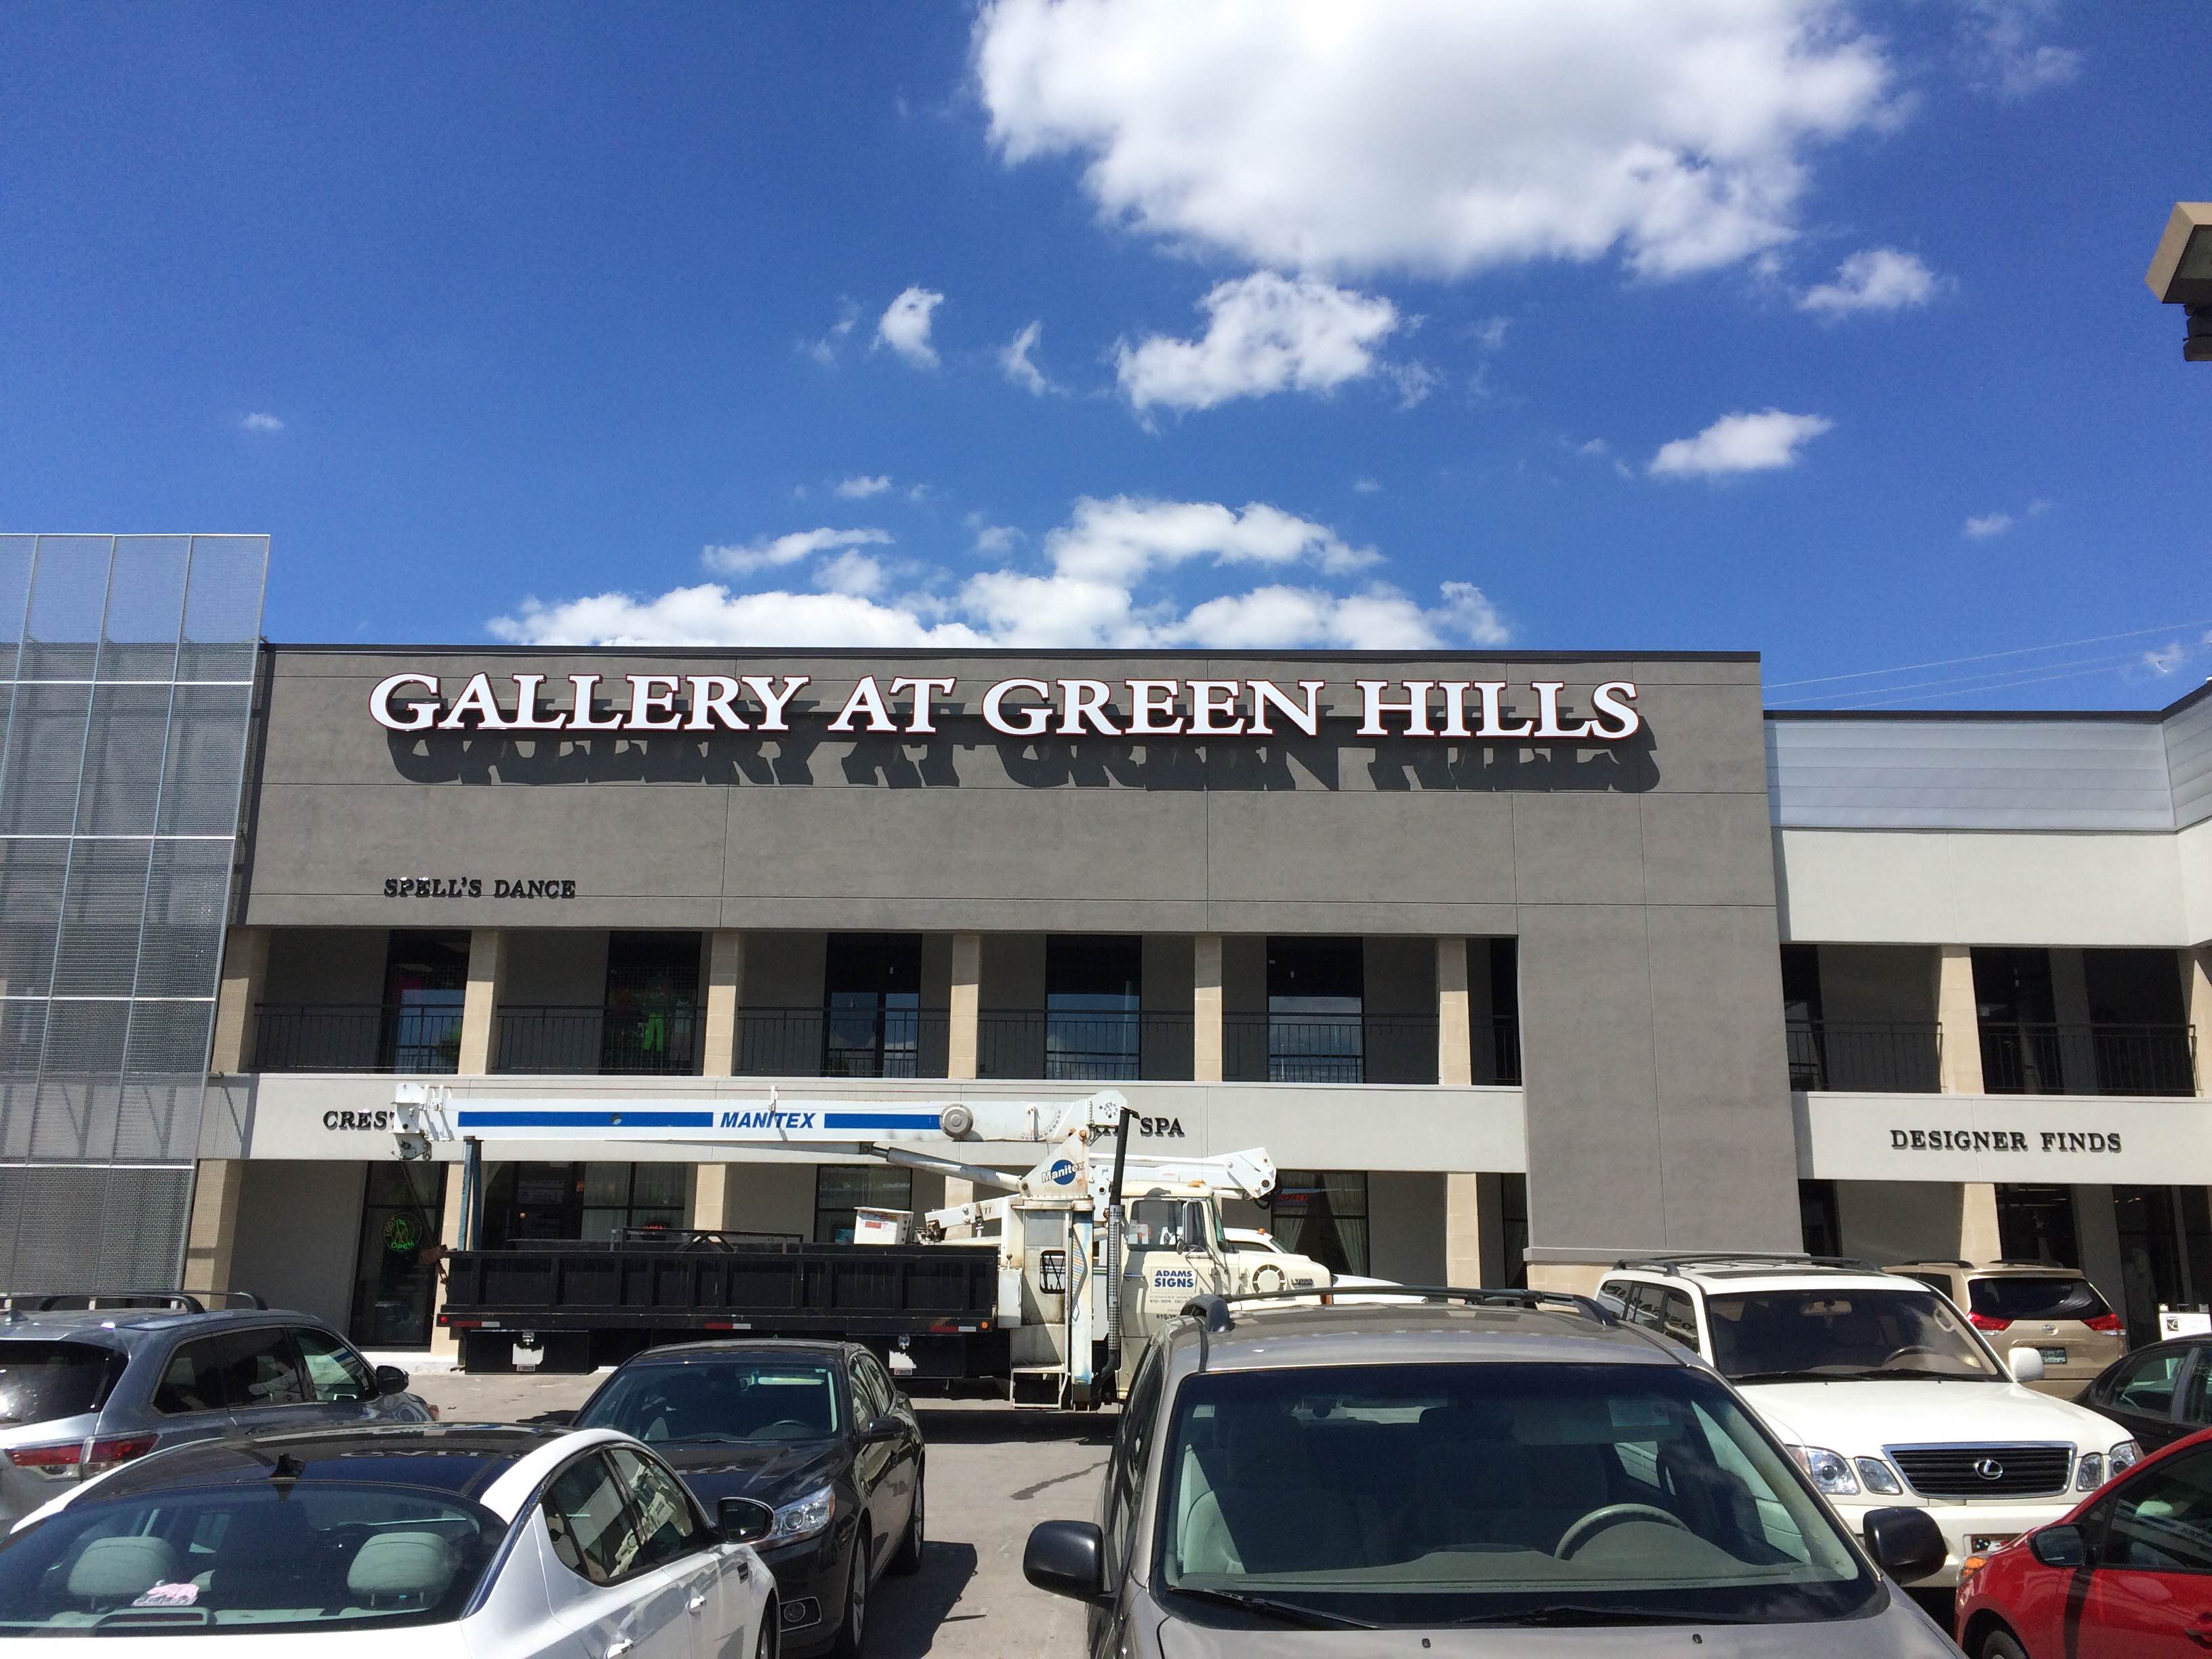 Gallery at Green Hills Channel Letters designed, fabricated and installed by Adams Signs & Awnings